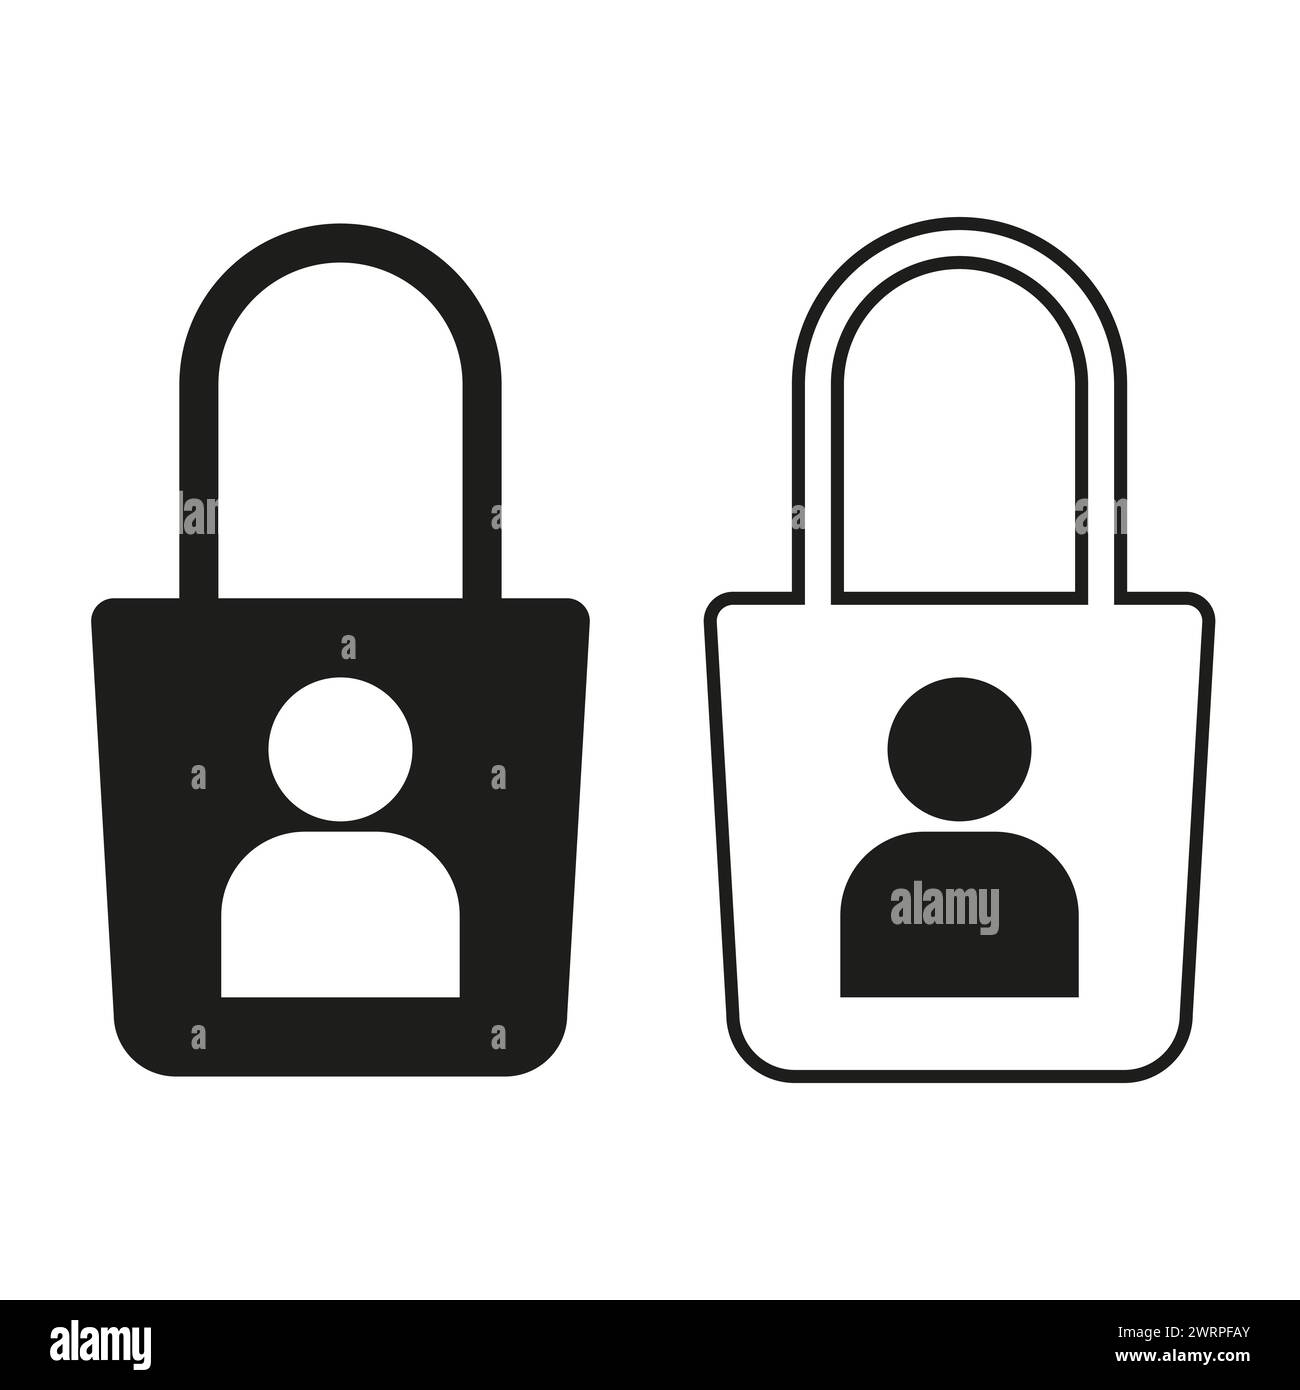 Personal Privacy Lock Icons. Vector illustration. EPS 10. Stock Vector